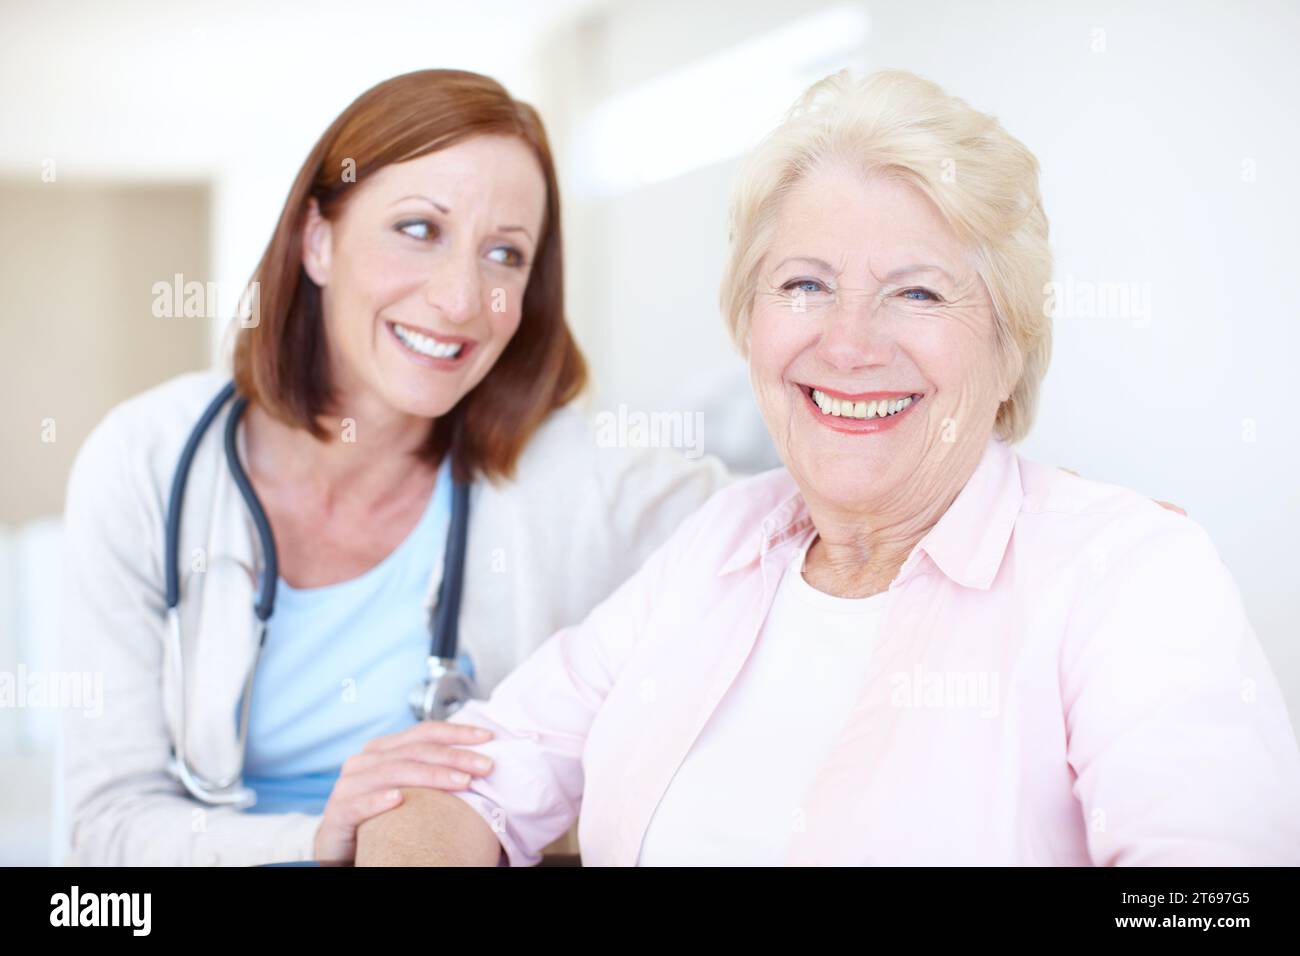 Relieved and ecstatic about her clean diagnosis. Happy elderly female patient receives some welcome company from her nurse. Stock Photo